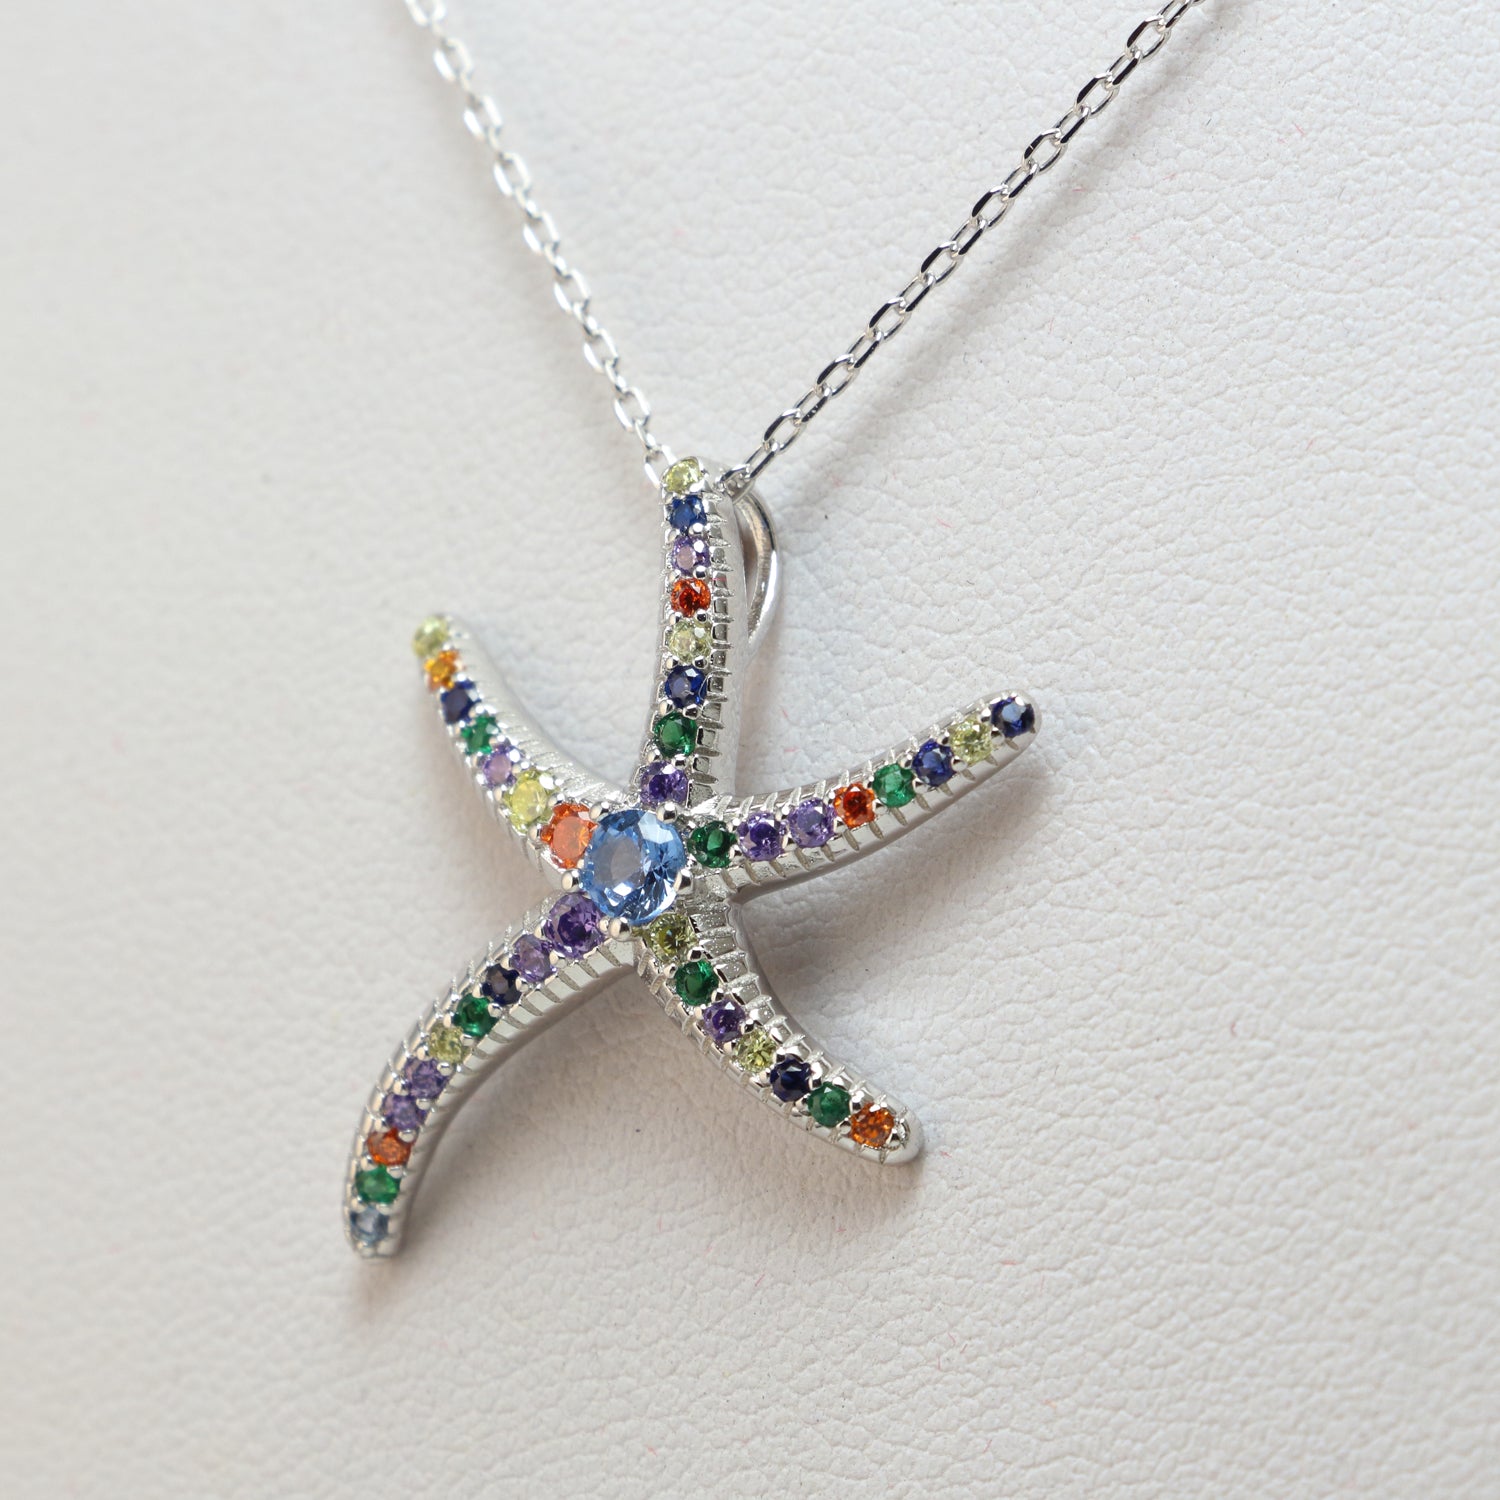 Starfish Necklace Silver